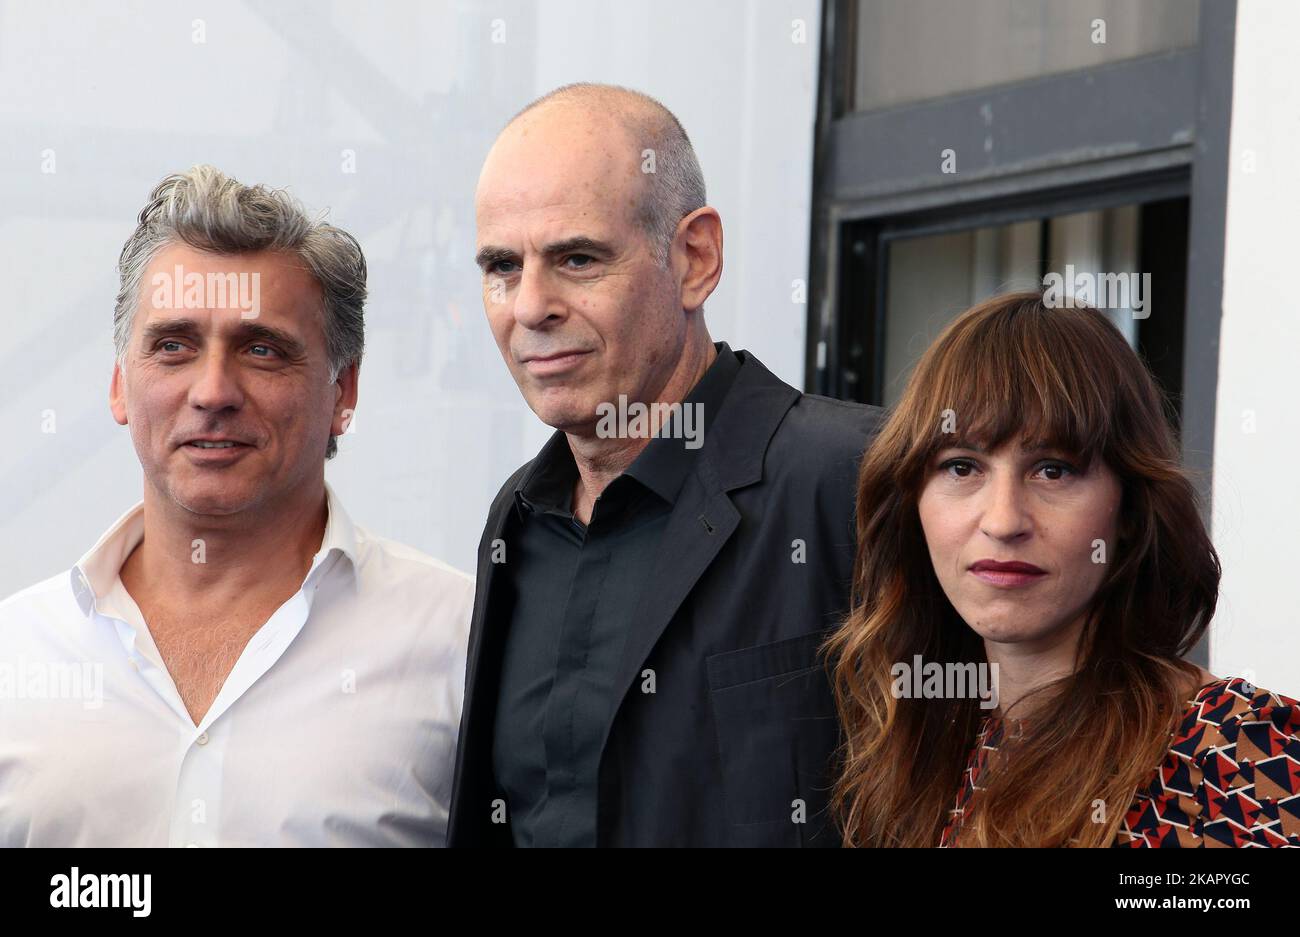 Actor Lior Ashkenazi, director Samuel Maoz, actress Sarah Adler attend the photocall of the movie 'Foxtrot' presented in competition at the 74th Venice Film Festival in Venice, Italy, on September 2, 2017. (Photo by Matteo Chinellato/NurPhoto) Stock Photo